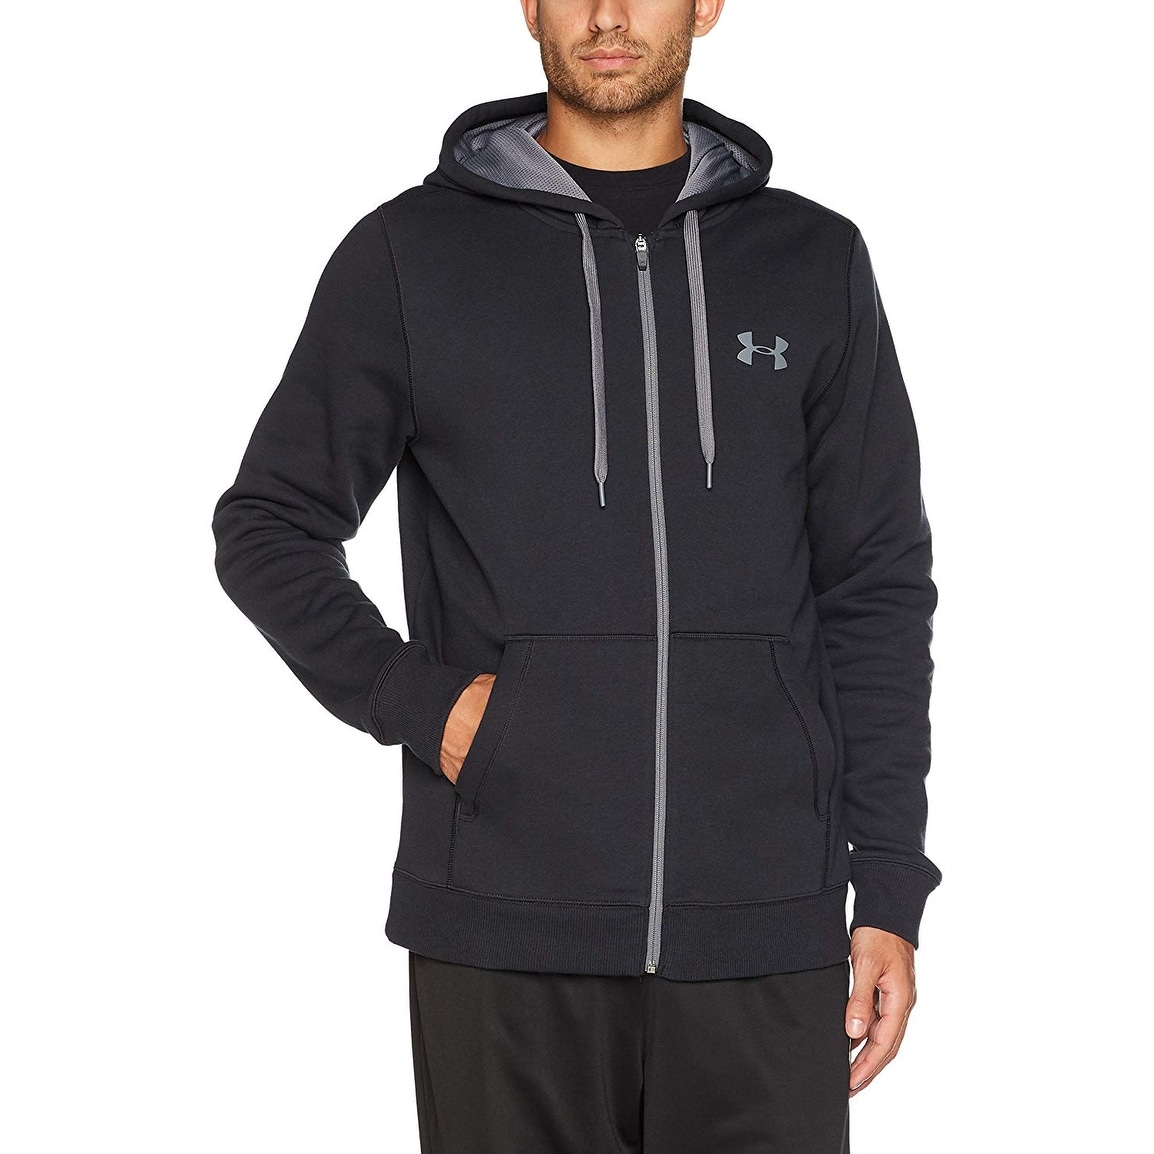 under armour hoodie 3xl tall